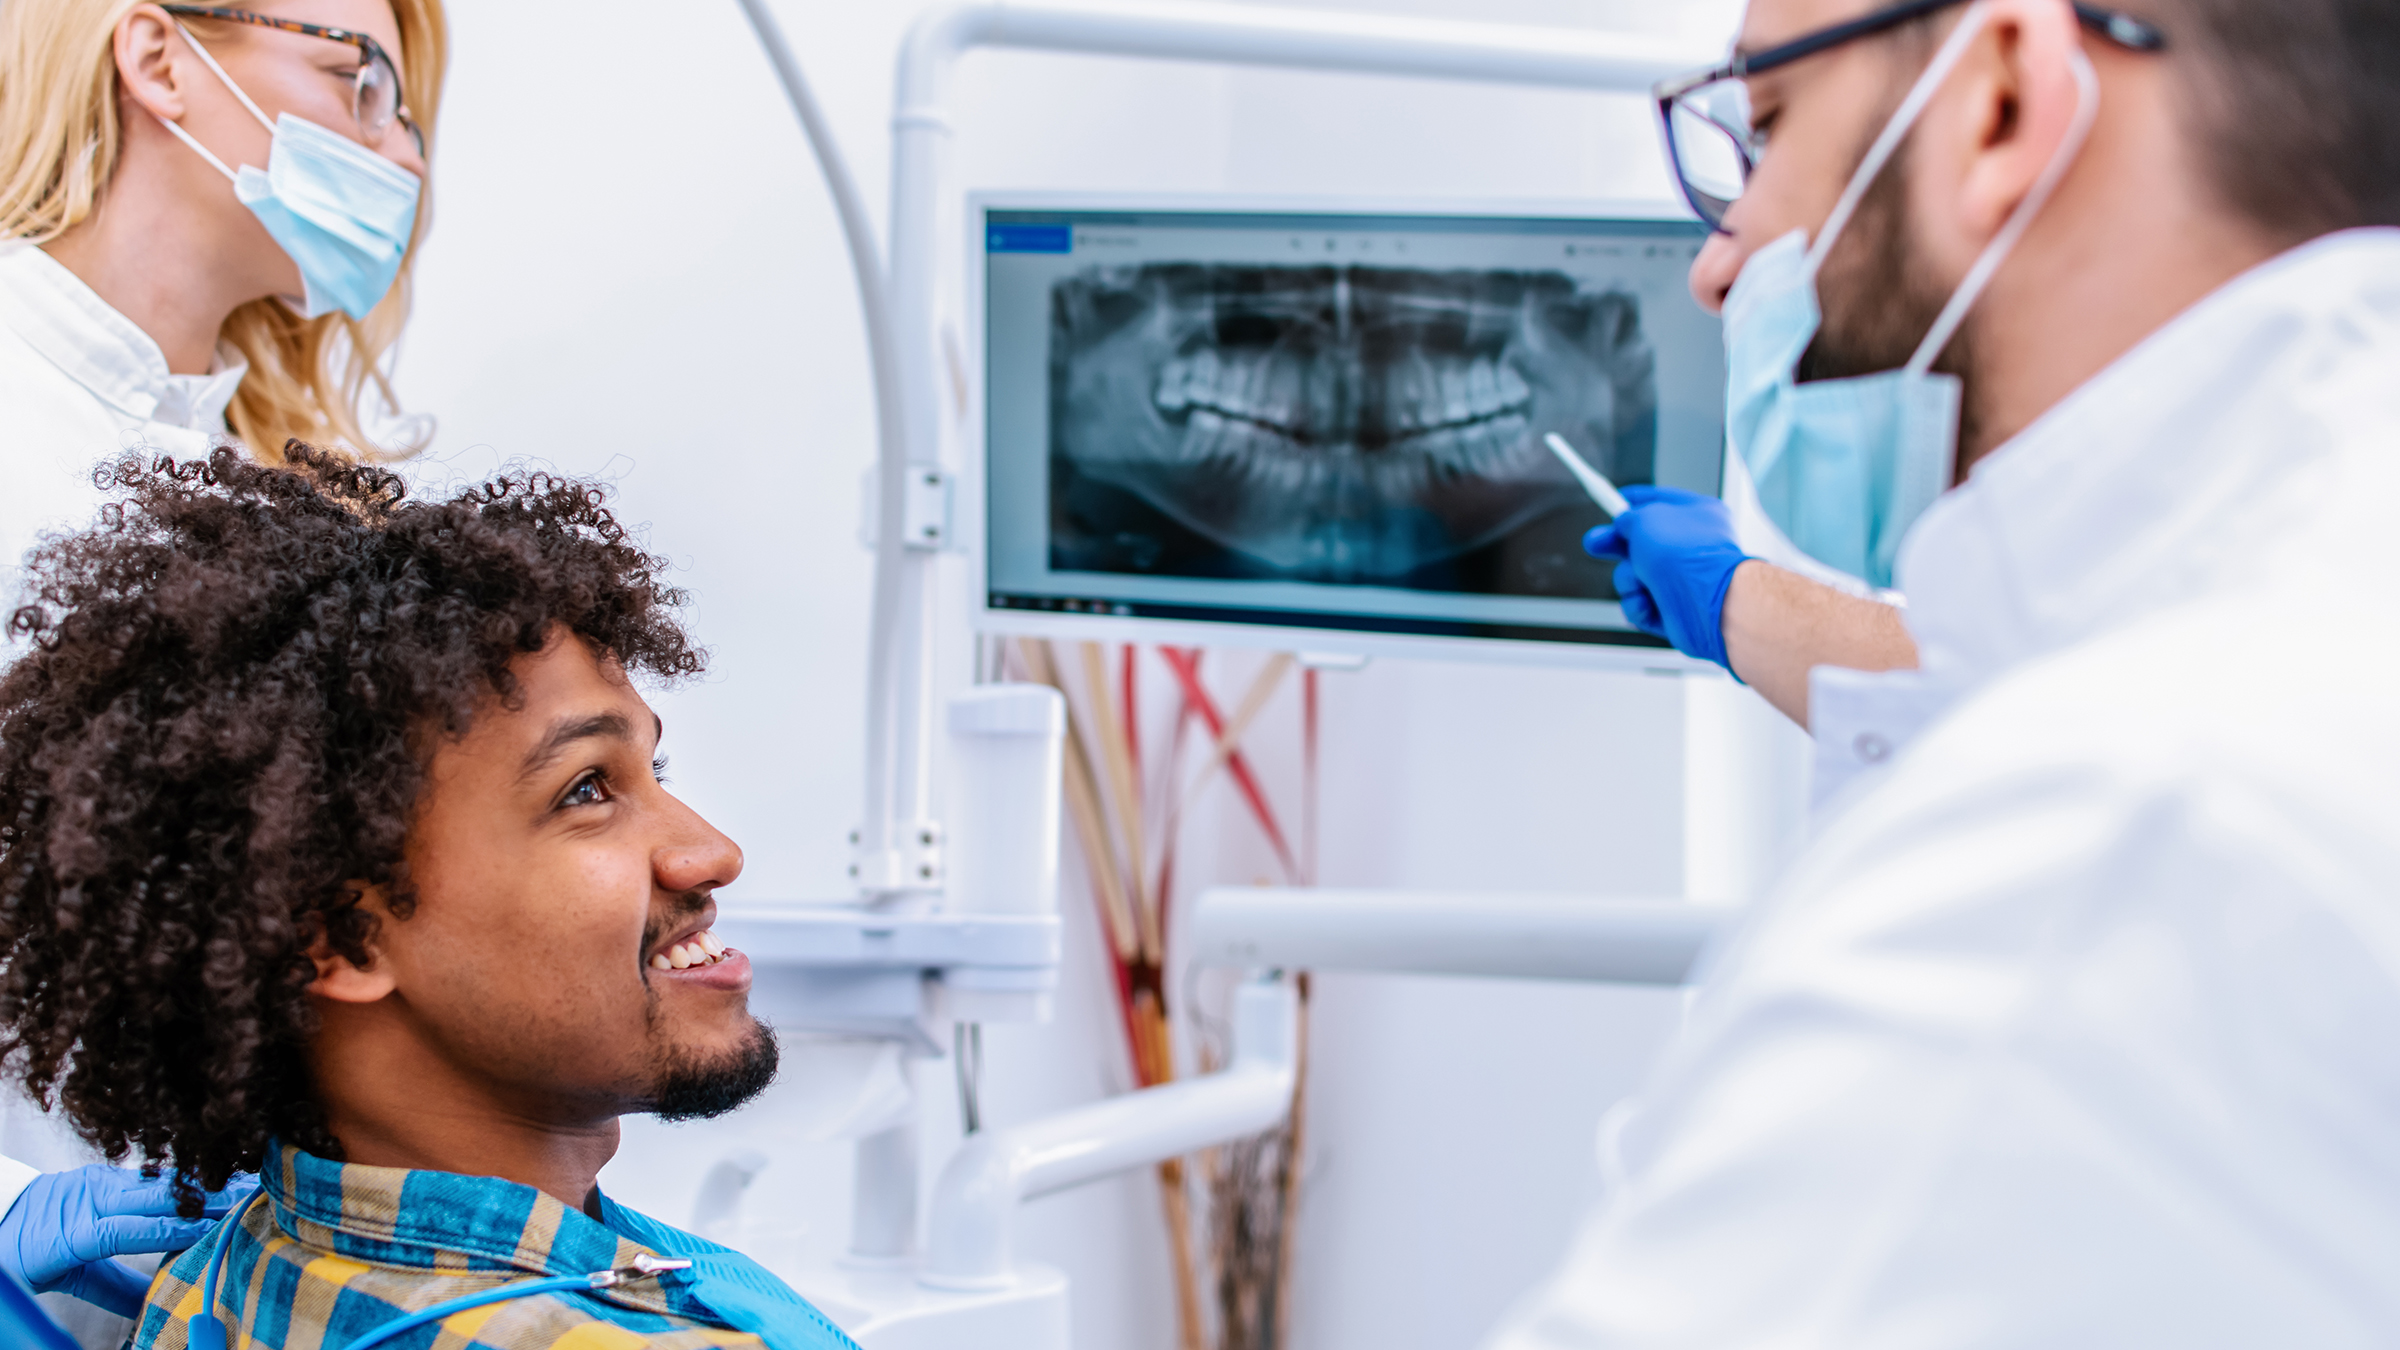 How Much Should I Expect a Root Canal to Cost? - GoodRx